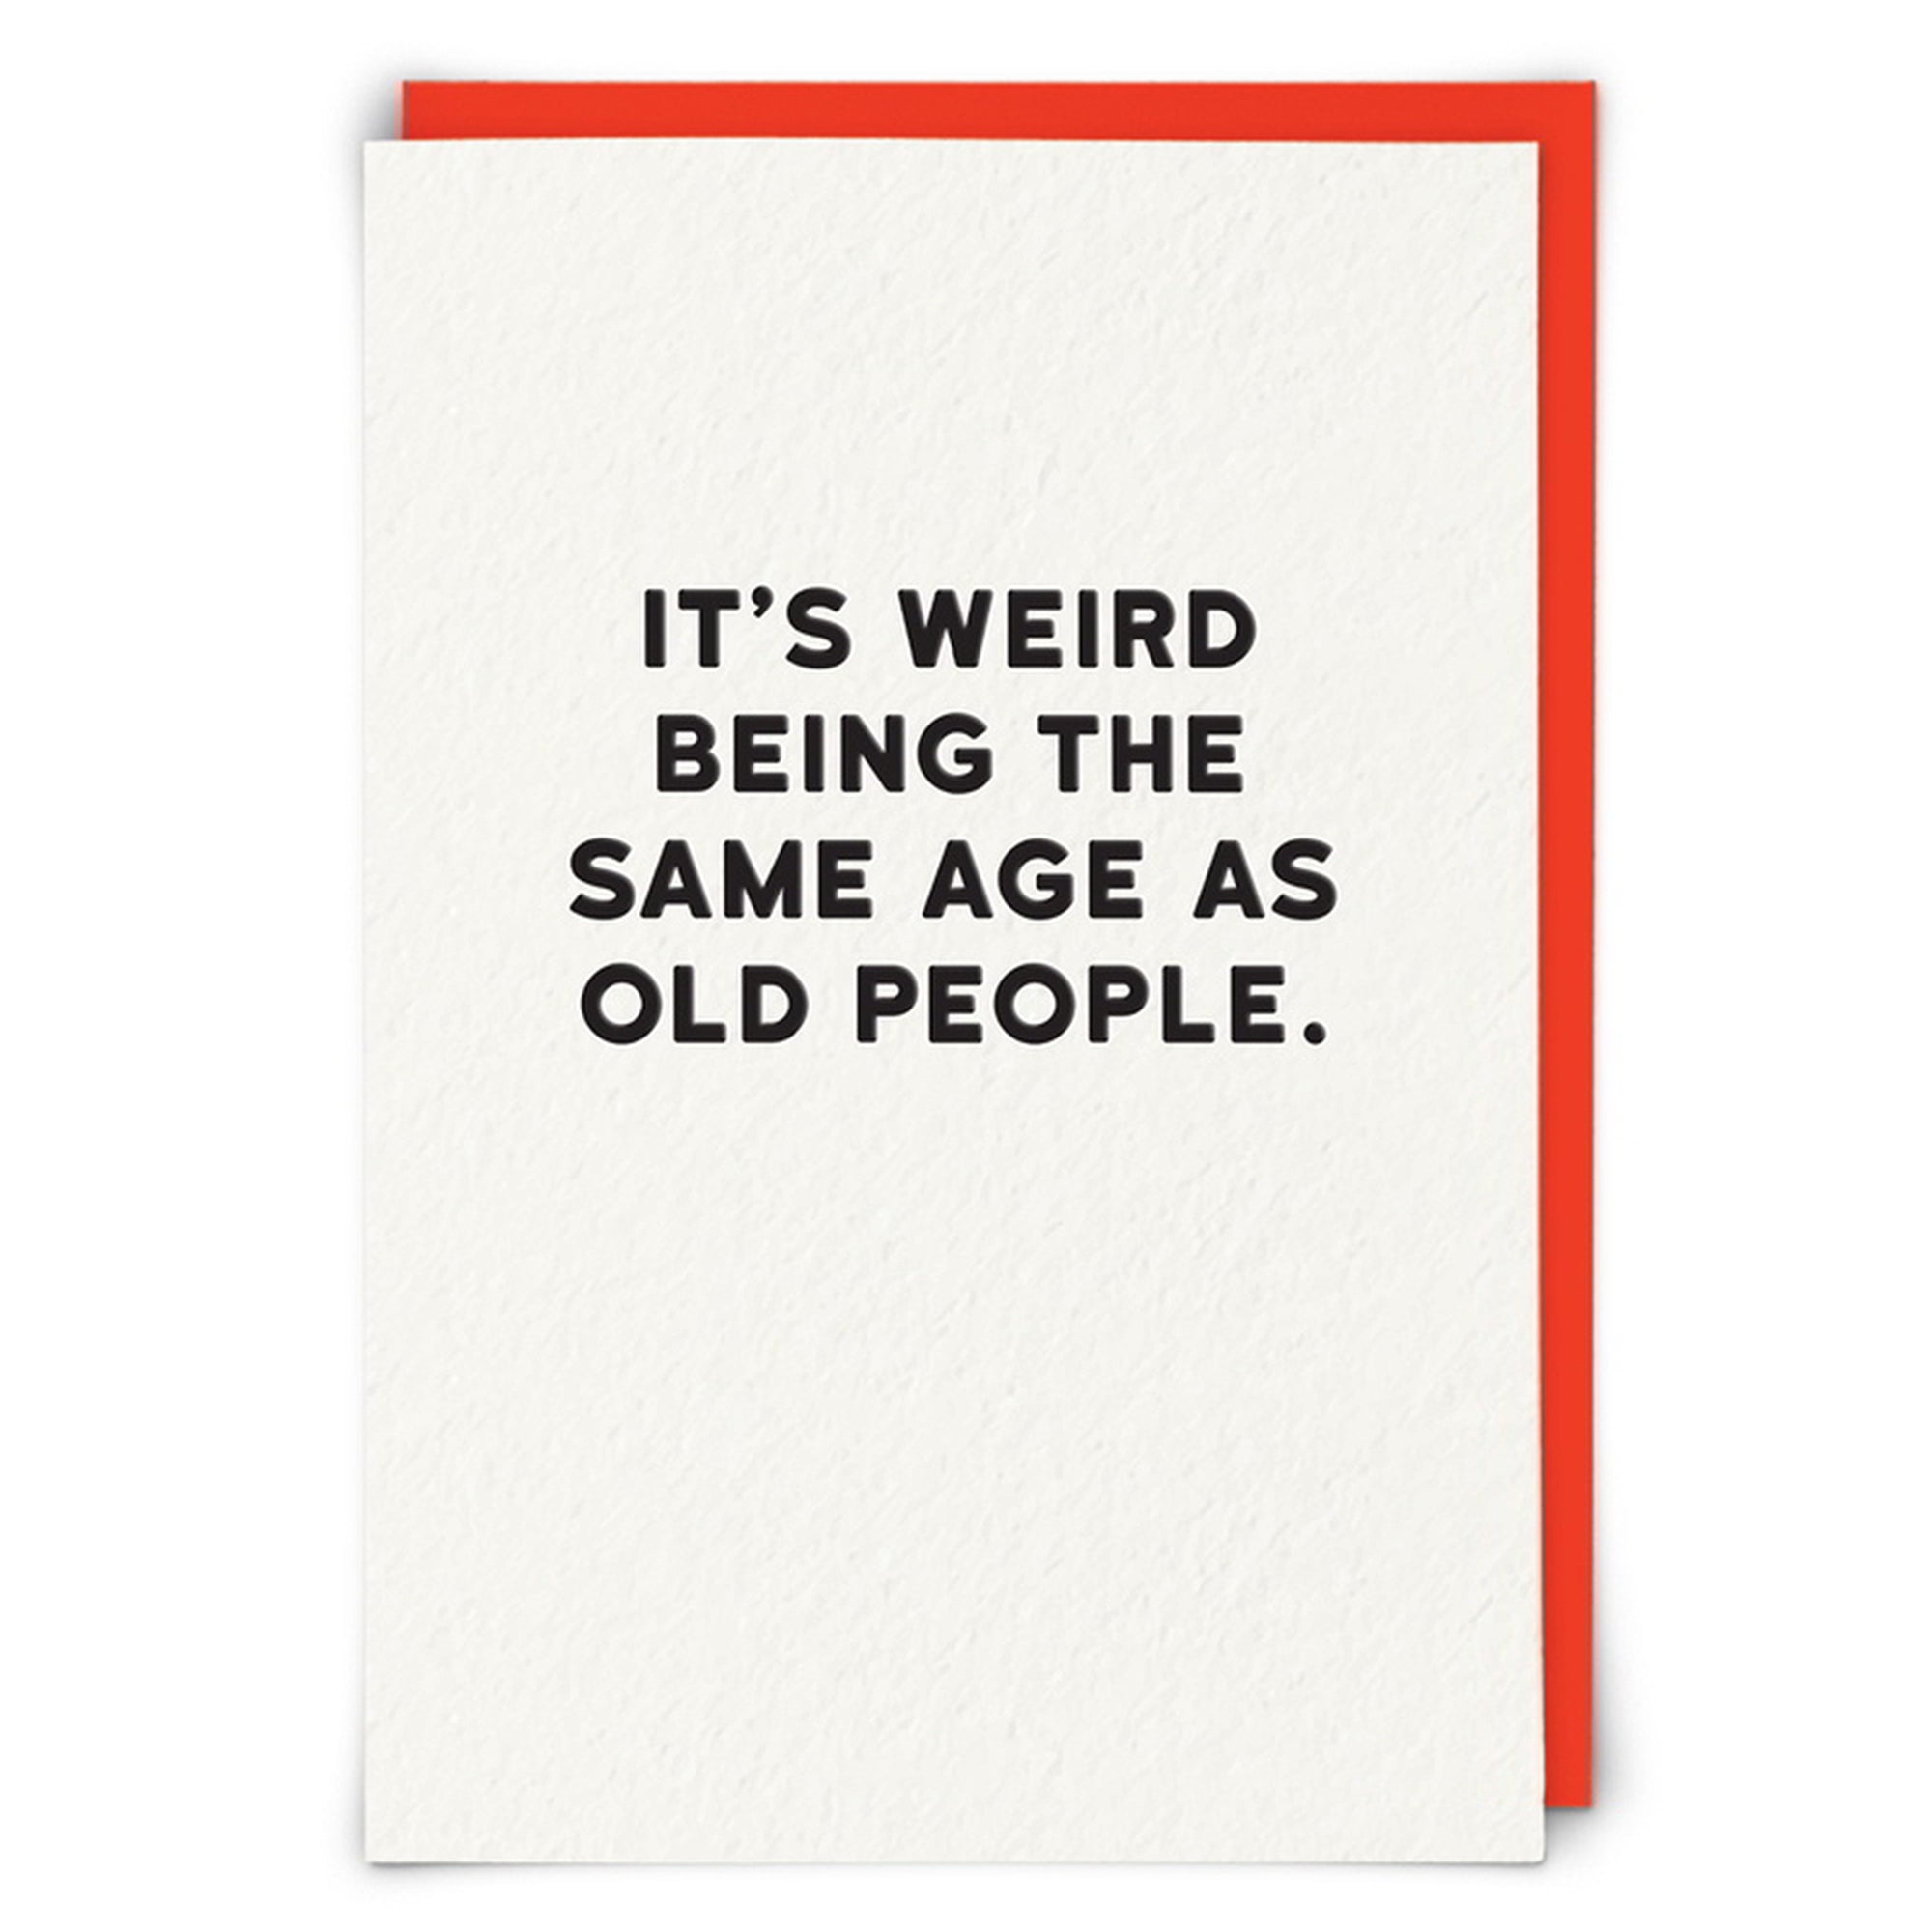 Same Age as Old People Funny Birthday Card from Penny Black